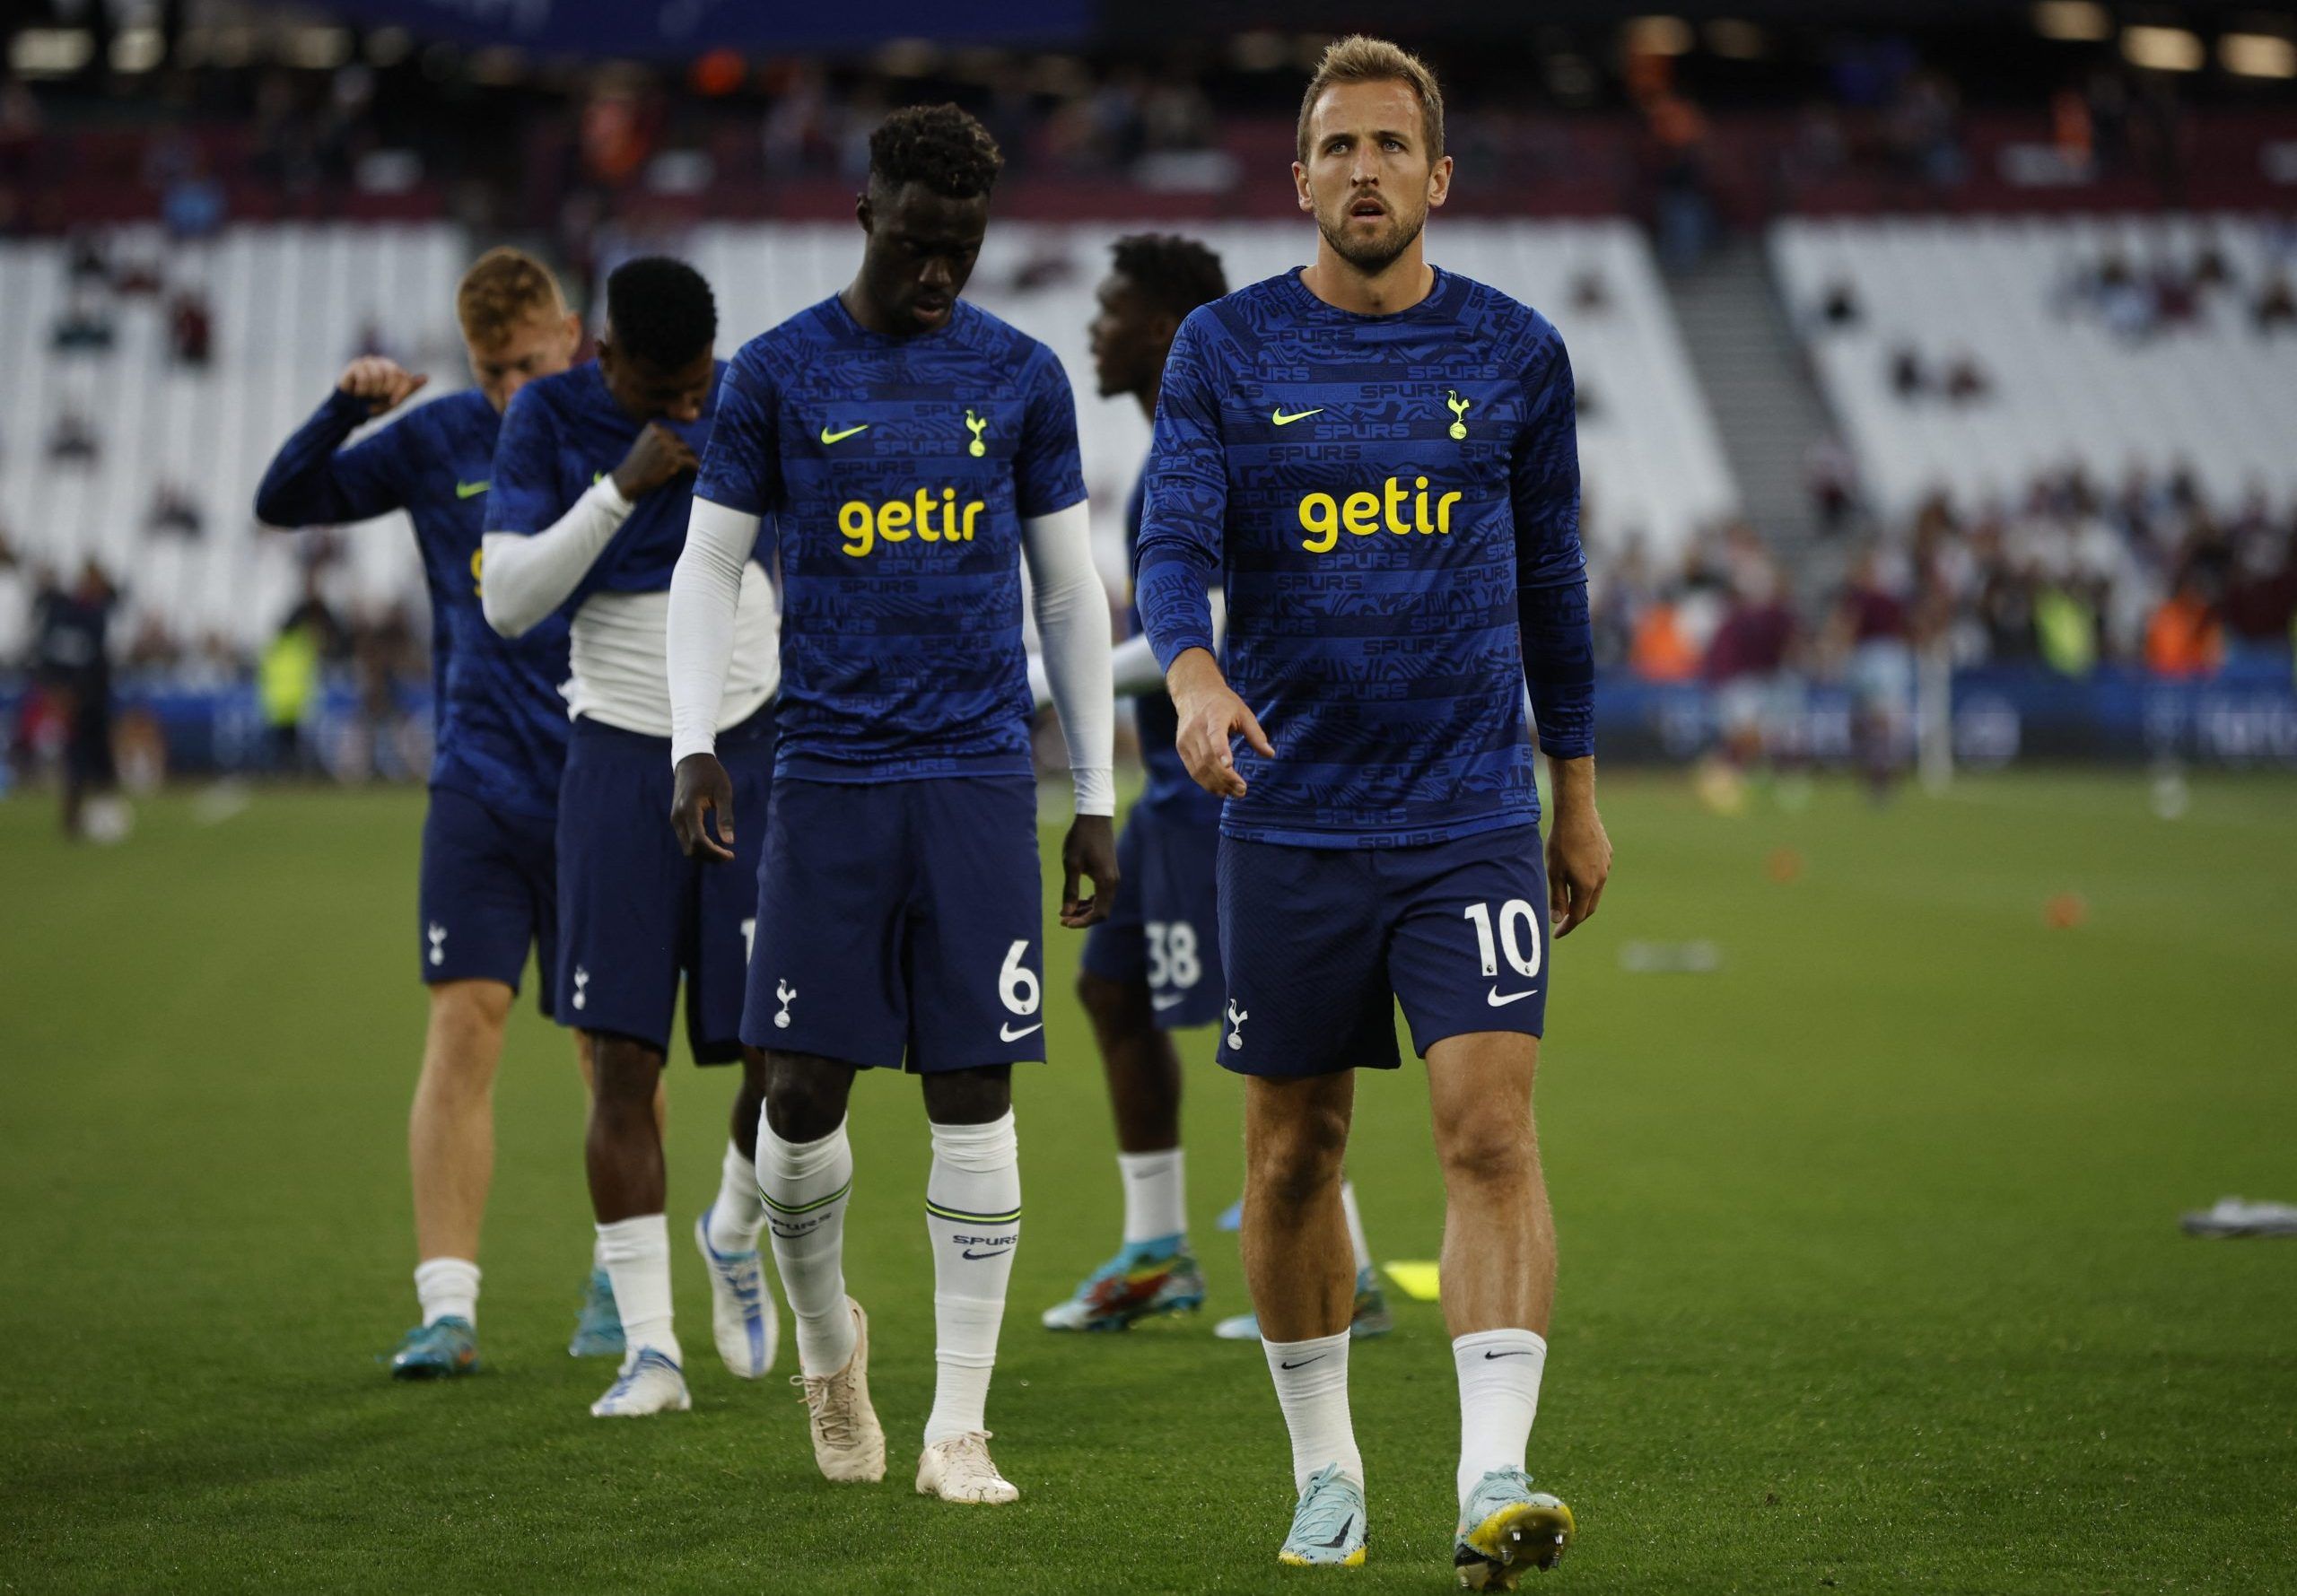 Tottenham Hotspur's Harry Kane during the warm up before the match